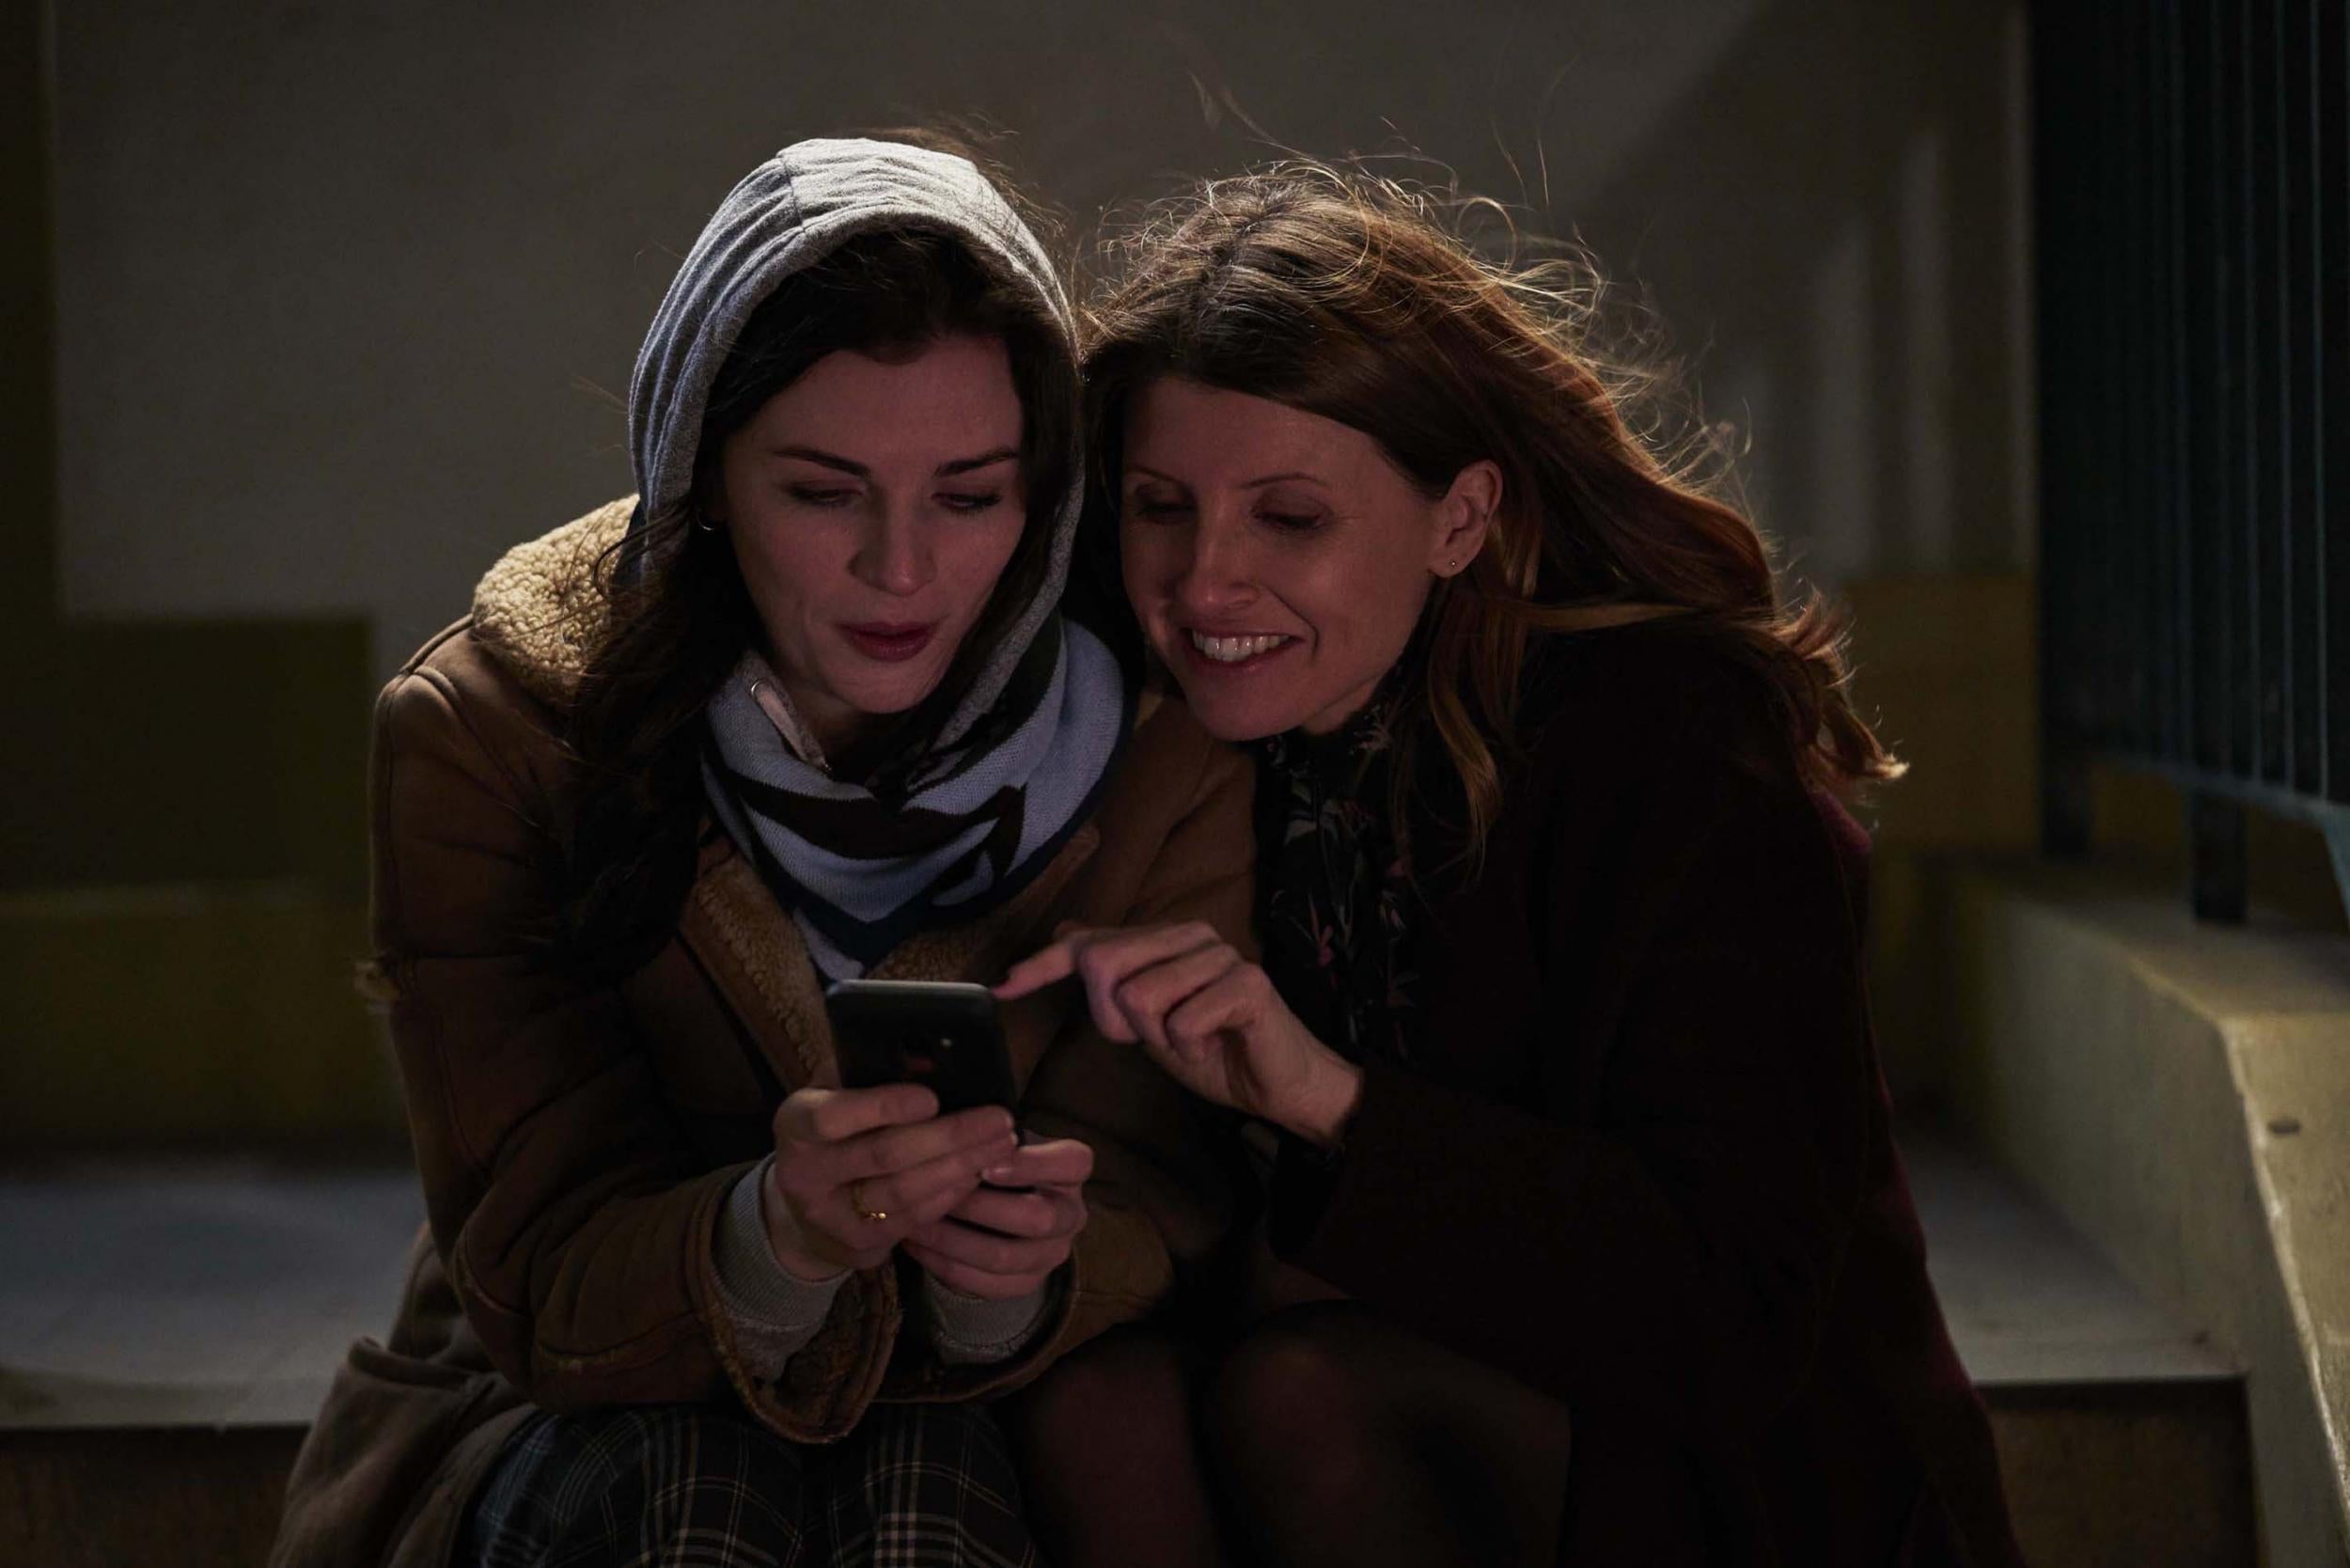 Sister act: Aine (Aisling Bea, left) and Shona (Sharon Horgan) trade wit and wordplay